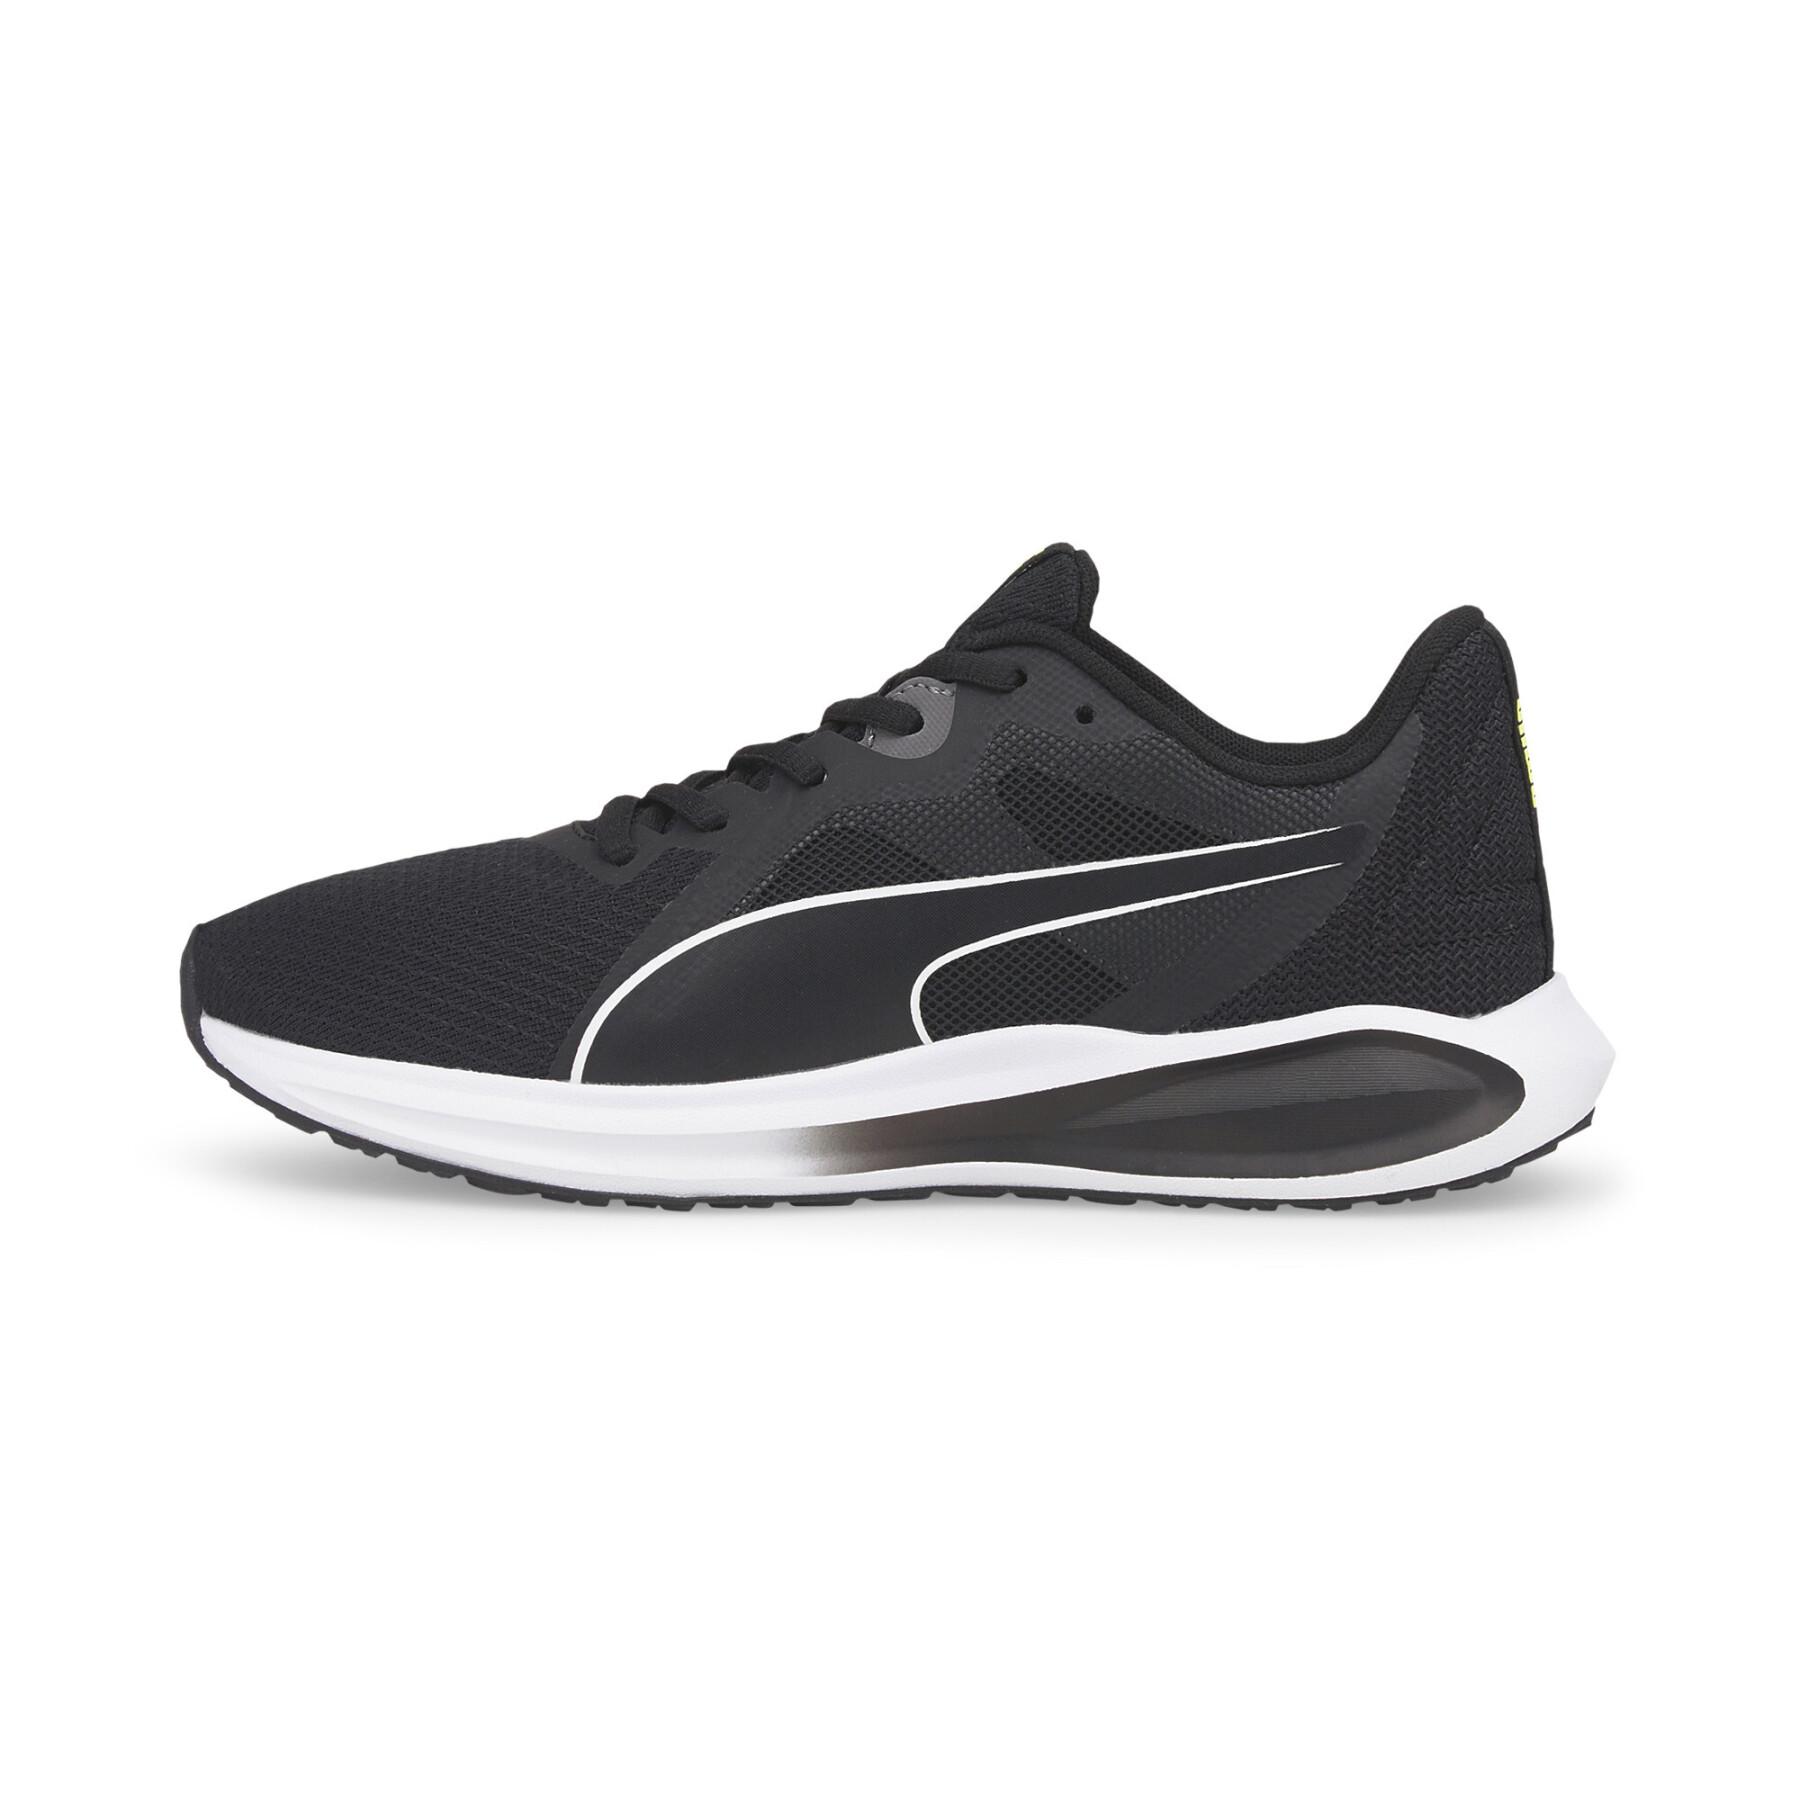 Shoes Puma Twitch Runner